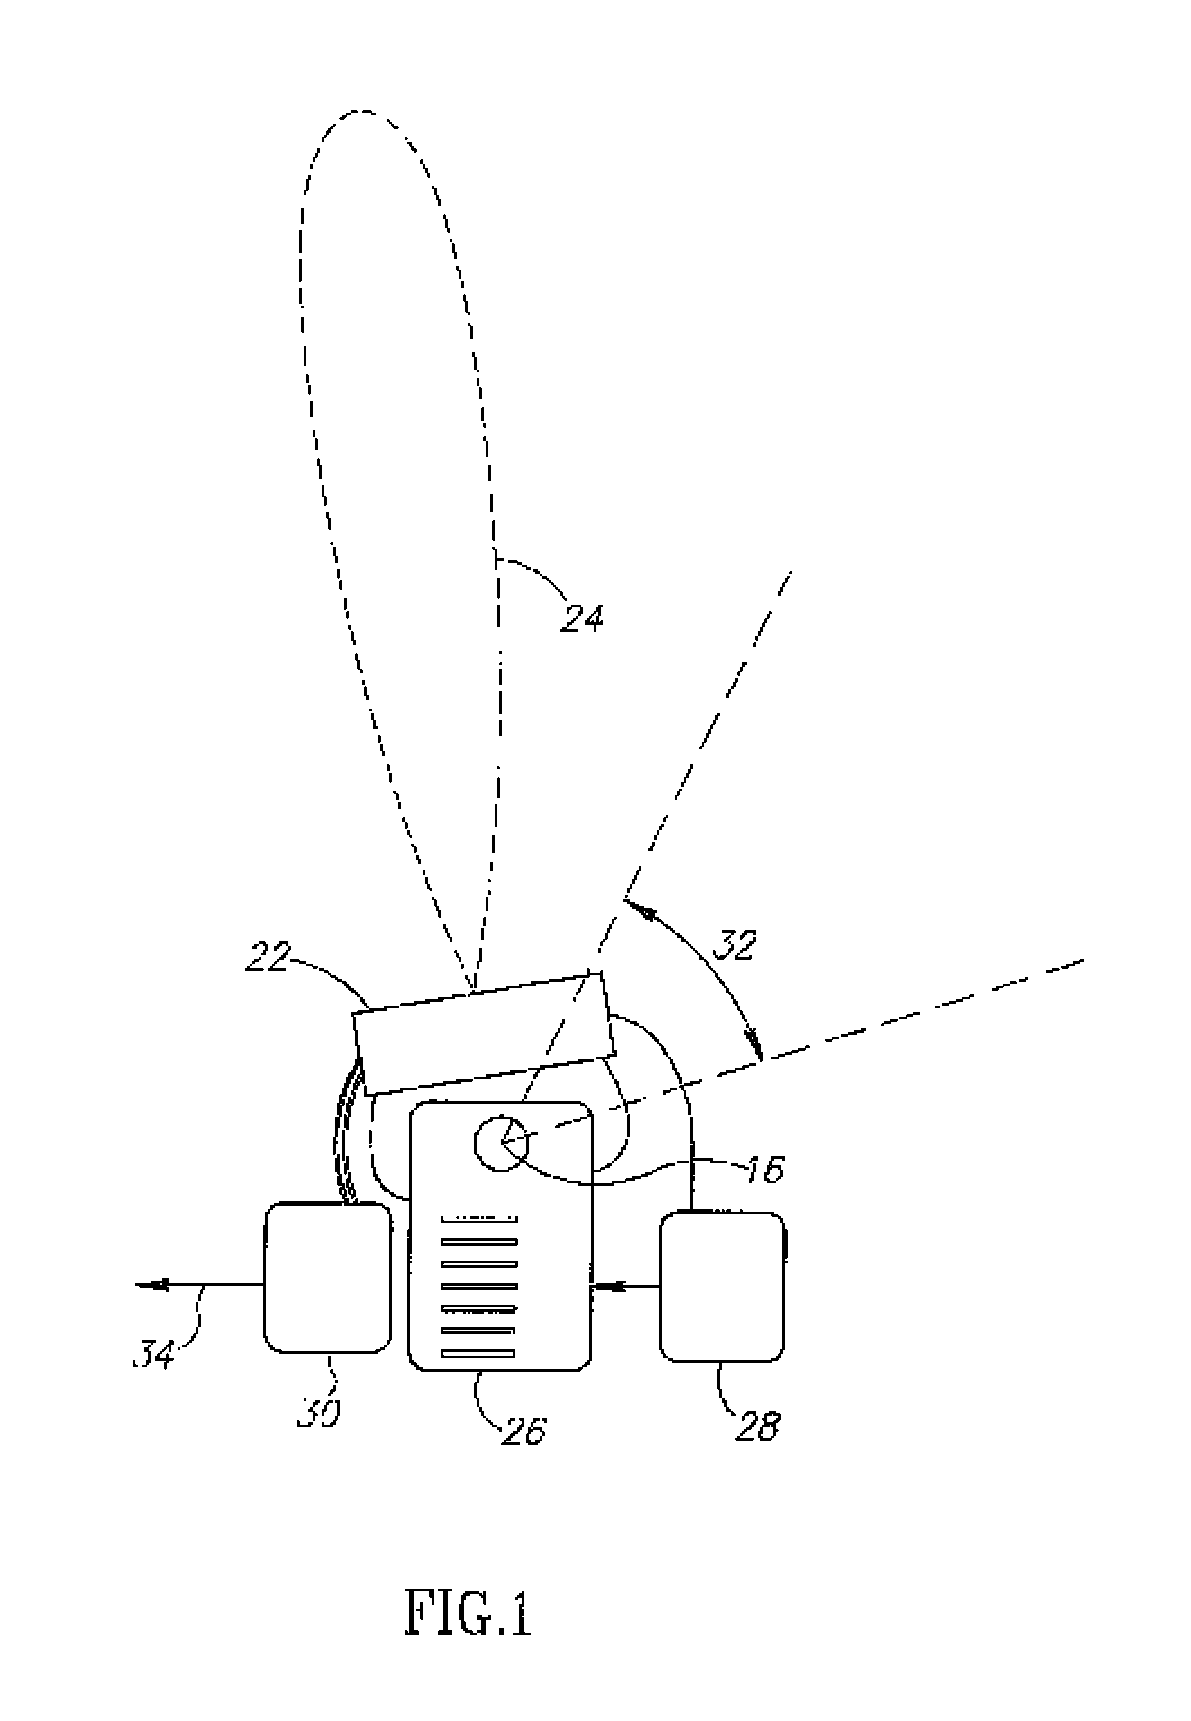 Localization of a Radioactive Source Within a Body of a Subject